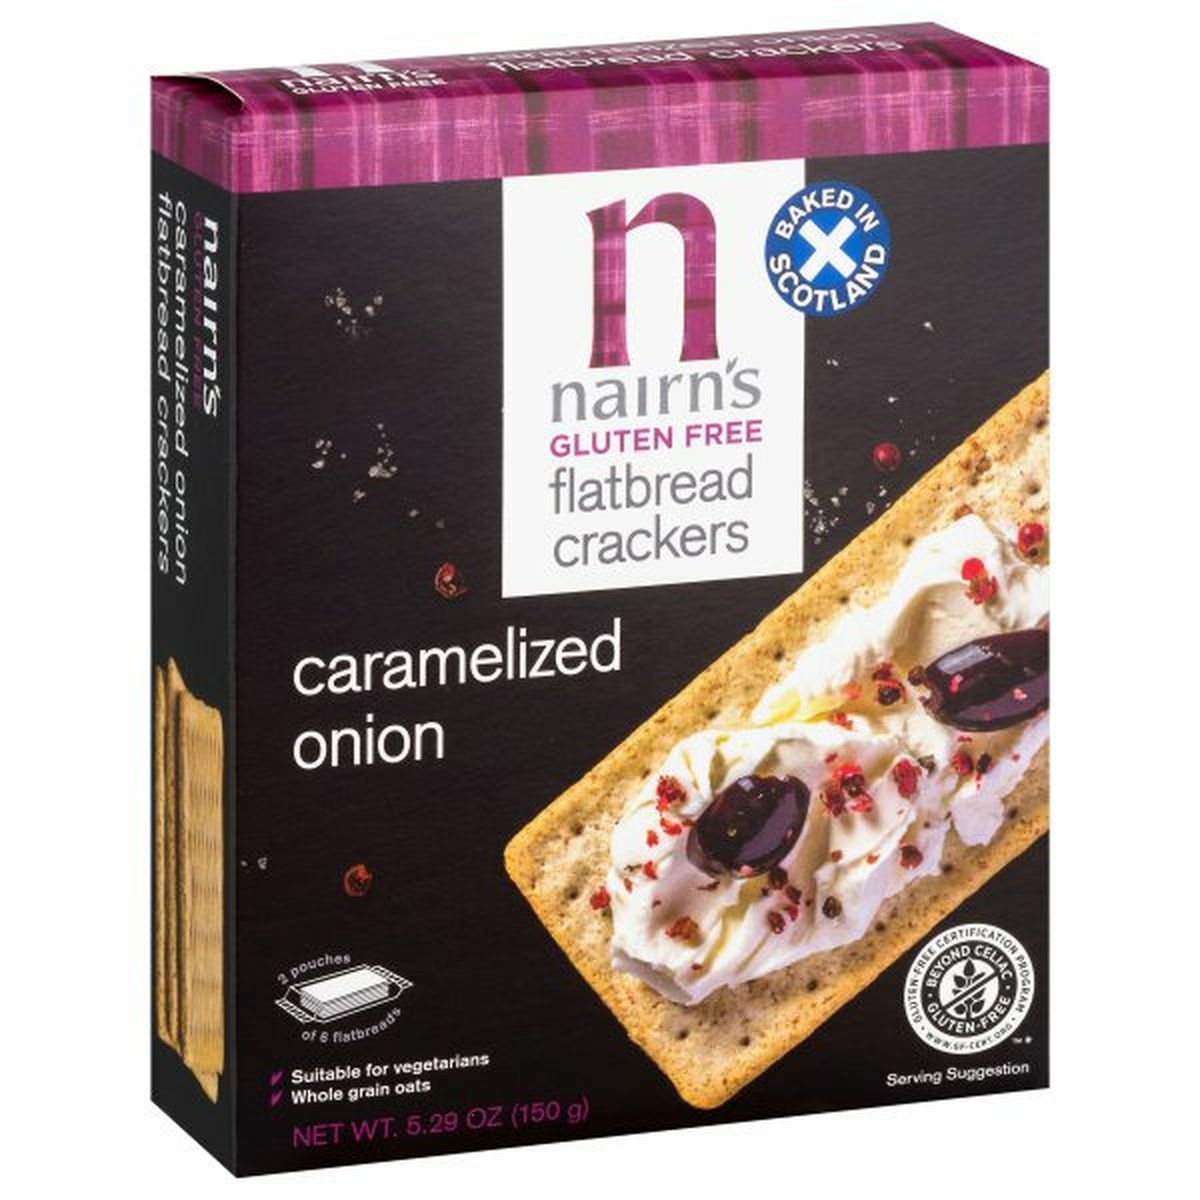 Calories in Nairn's Flatbread Crackers, Gluten Free, Caramelized Onion